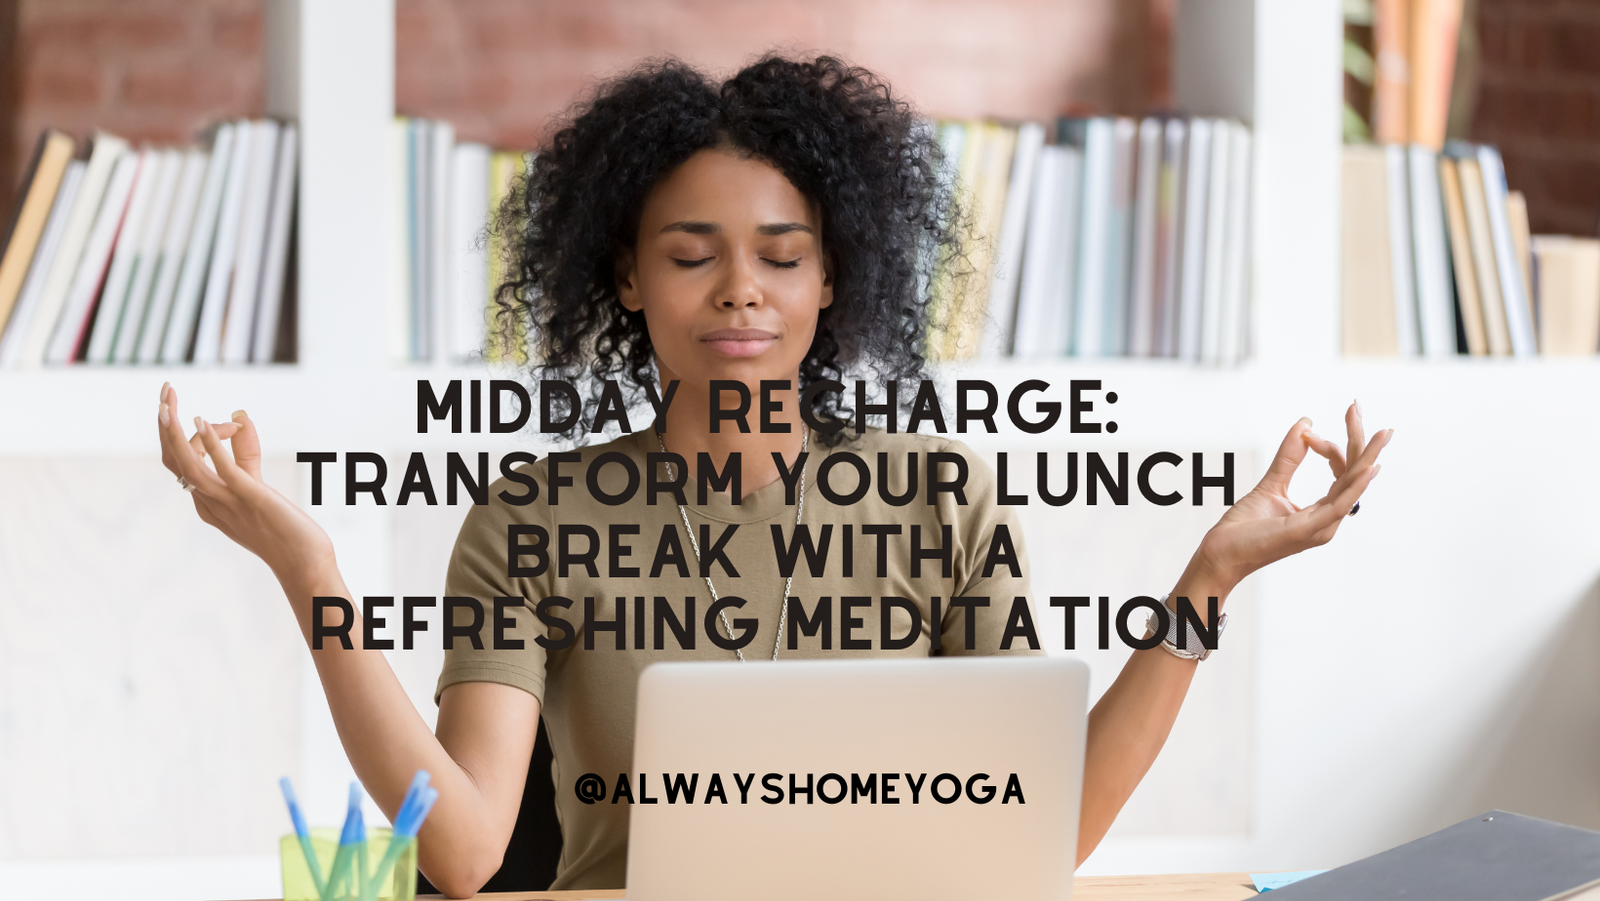 Midday Recharge: Transform Your Lunch Break with a Refreshing Meditation